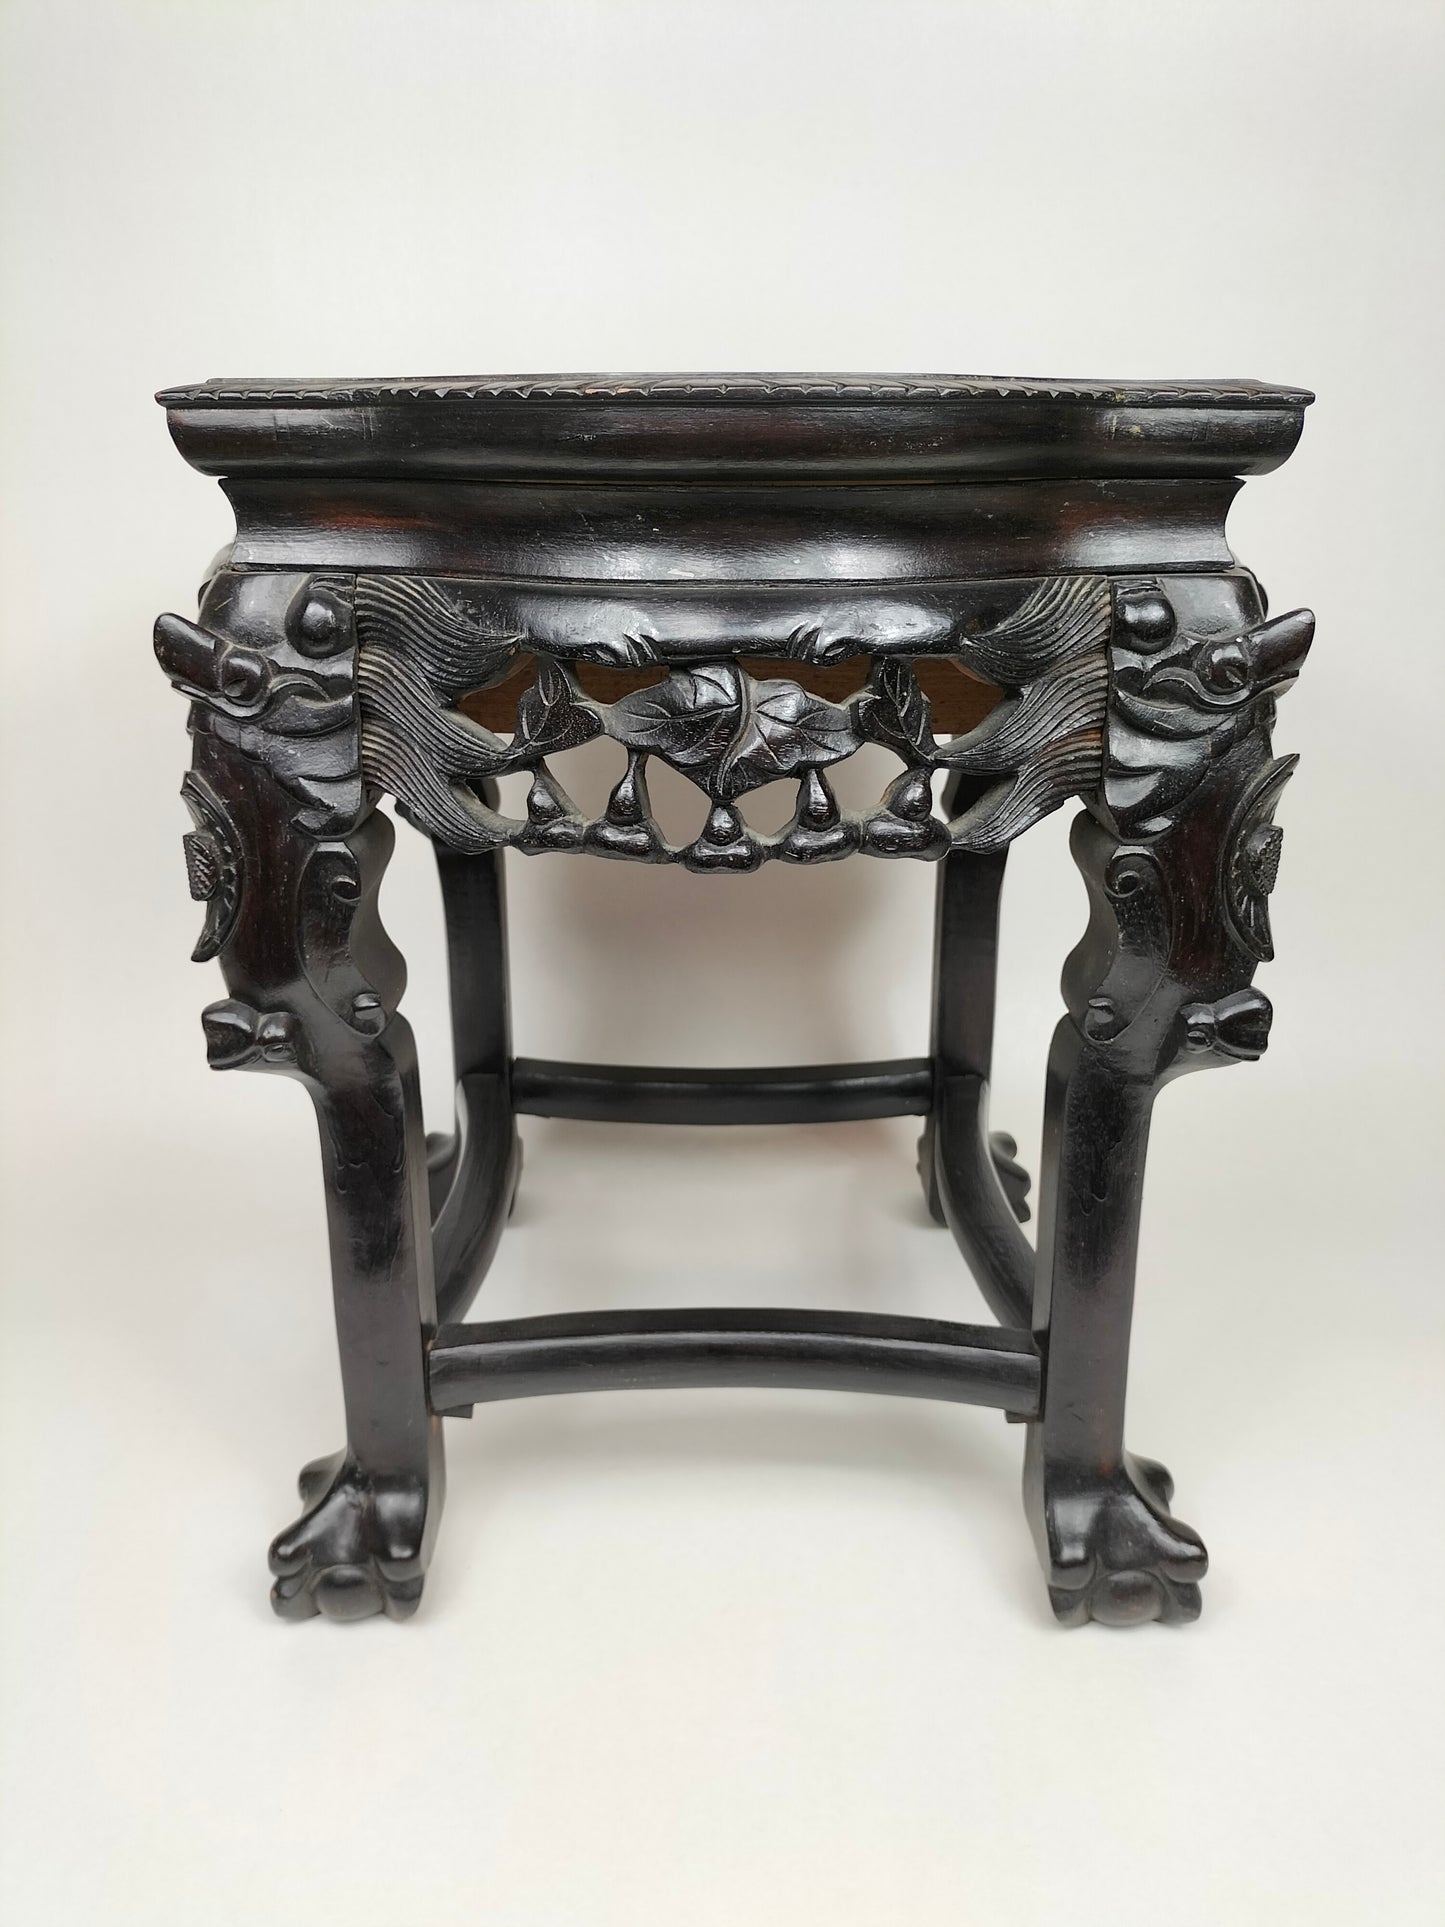 Antique Chinese side table inlaid wih a marble top // Early 20th century